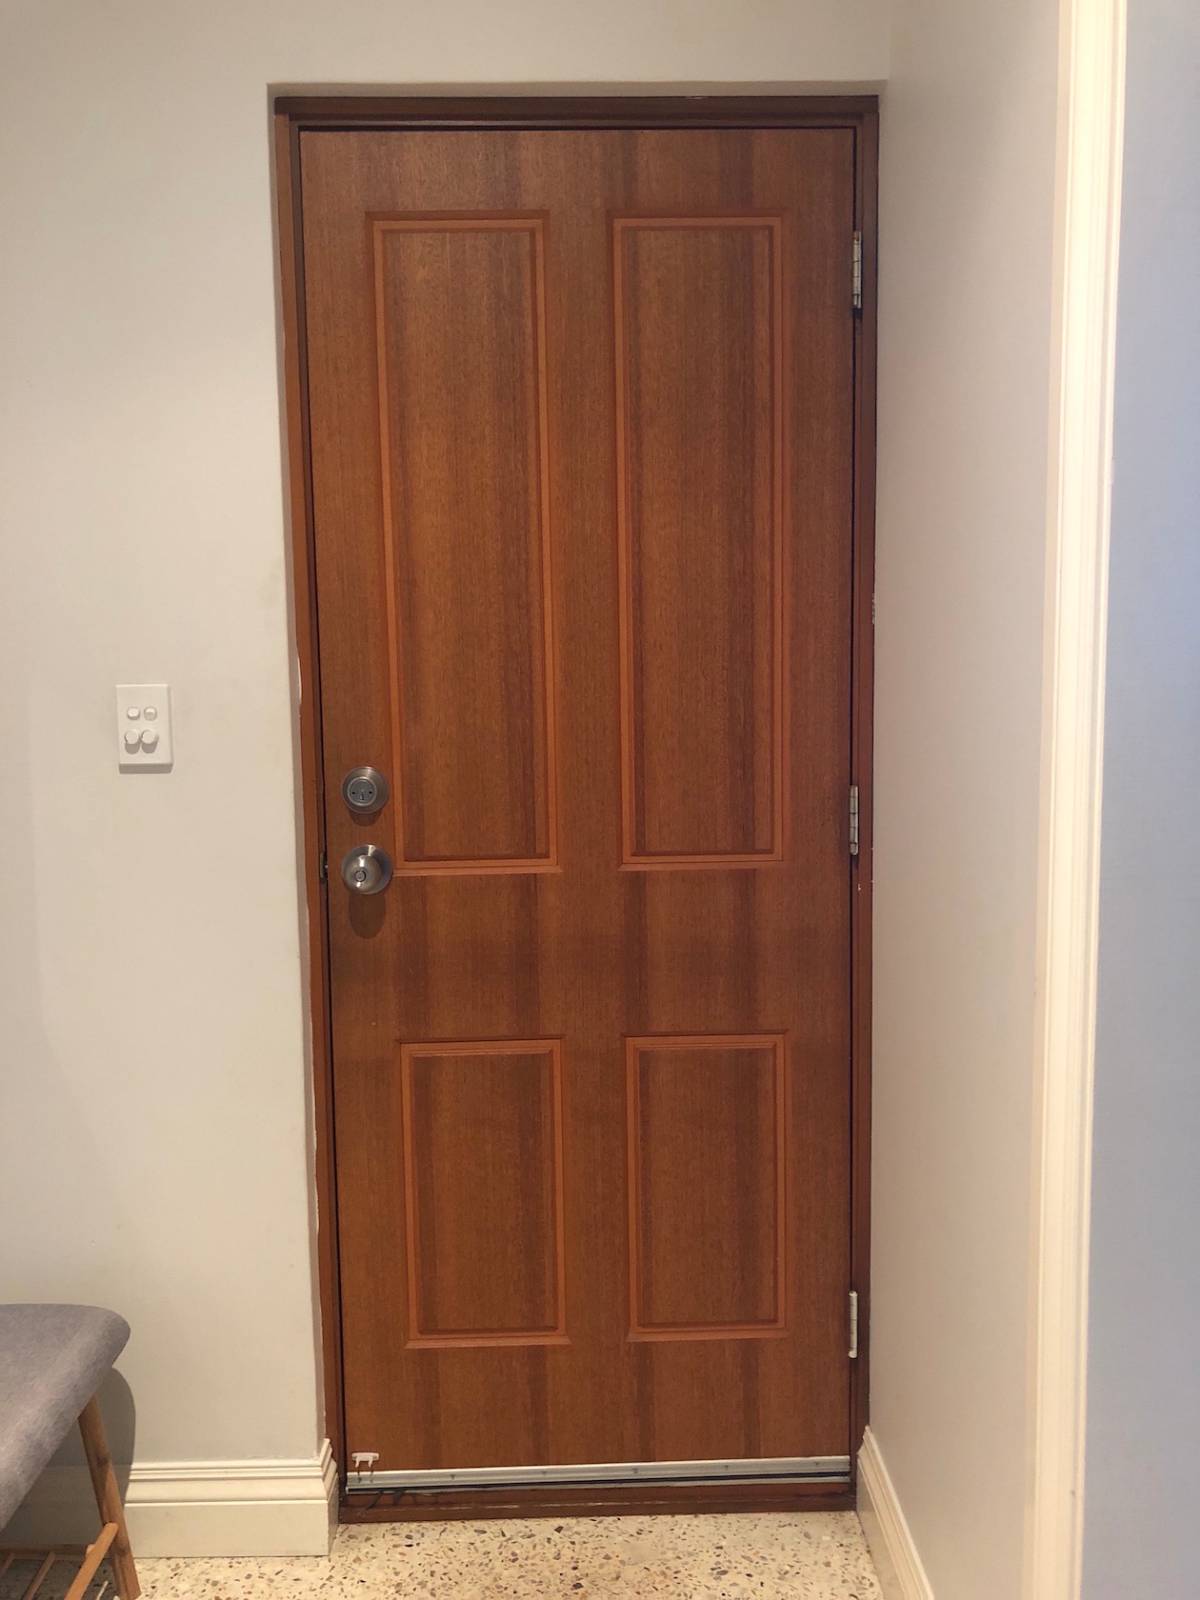 Best Soundproof Entry Door with glass panels (Perth)?